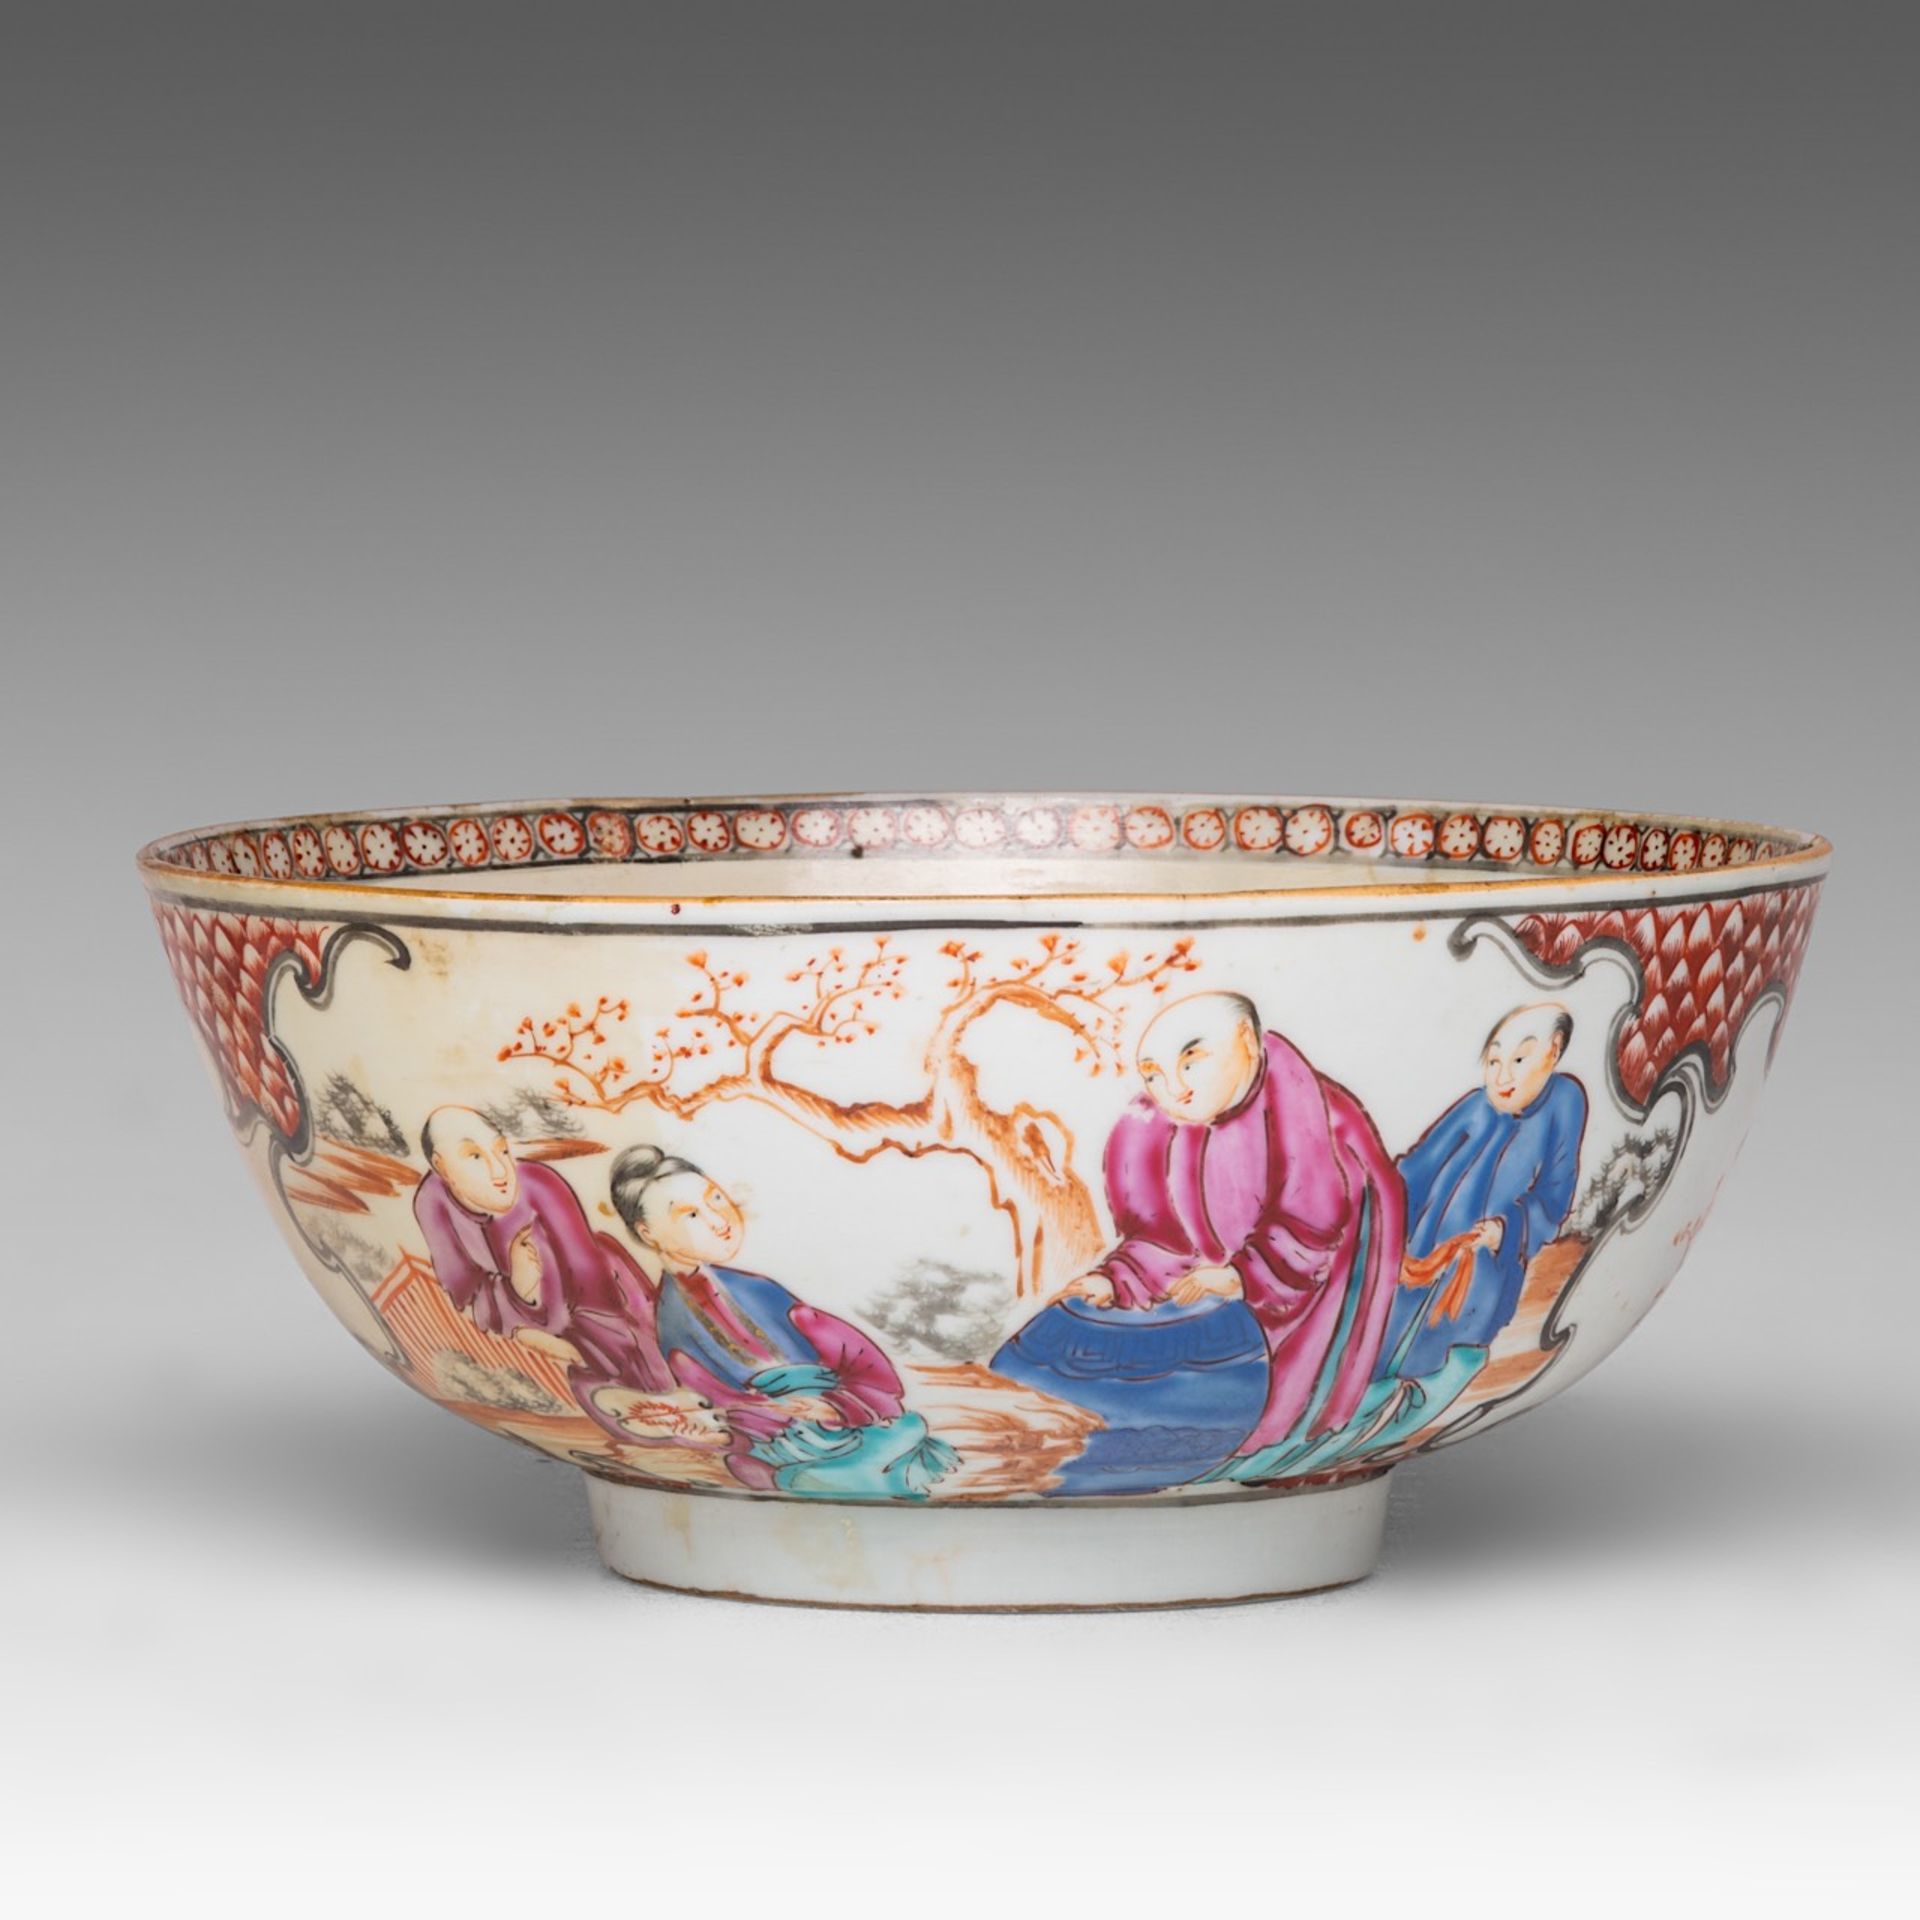 A small collection of Chinese famille rose and Imari export porcelain tea ware, 18thC, largest H 9 - - Image 9 of 17